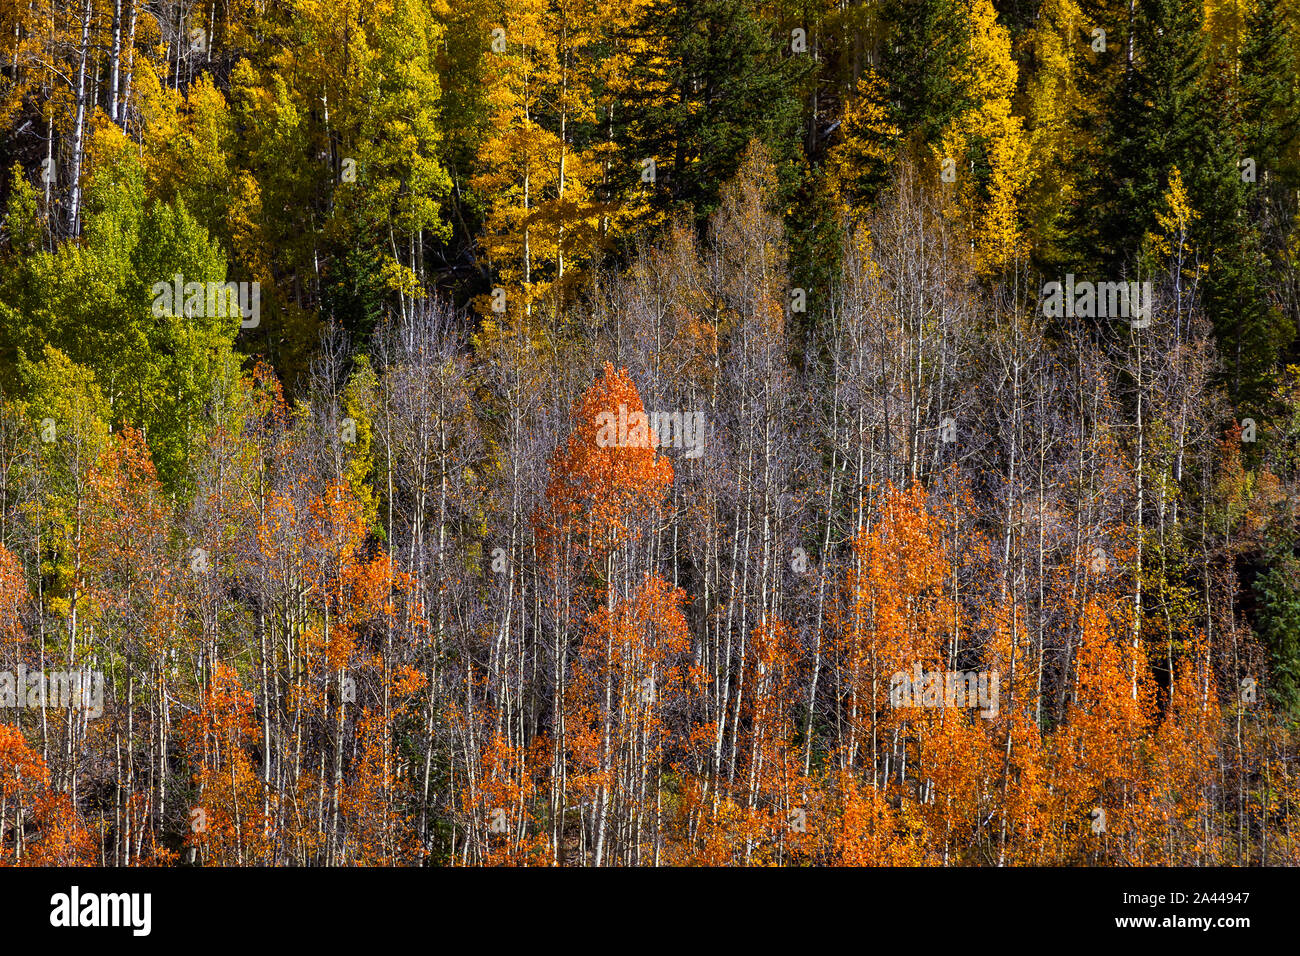 Autumn Aspen trees forest with yellow and orange fall colors Stock Photo